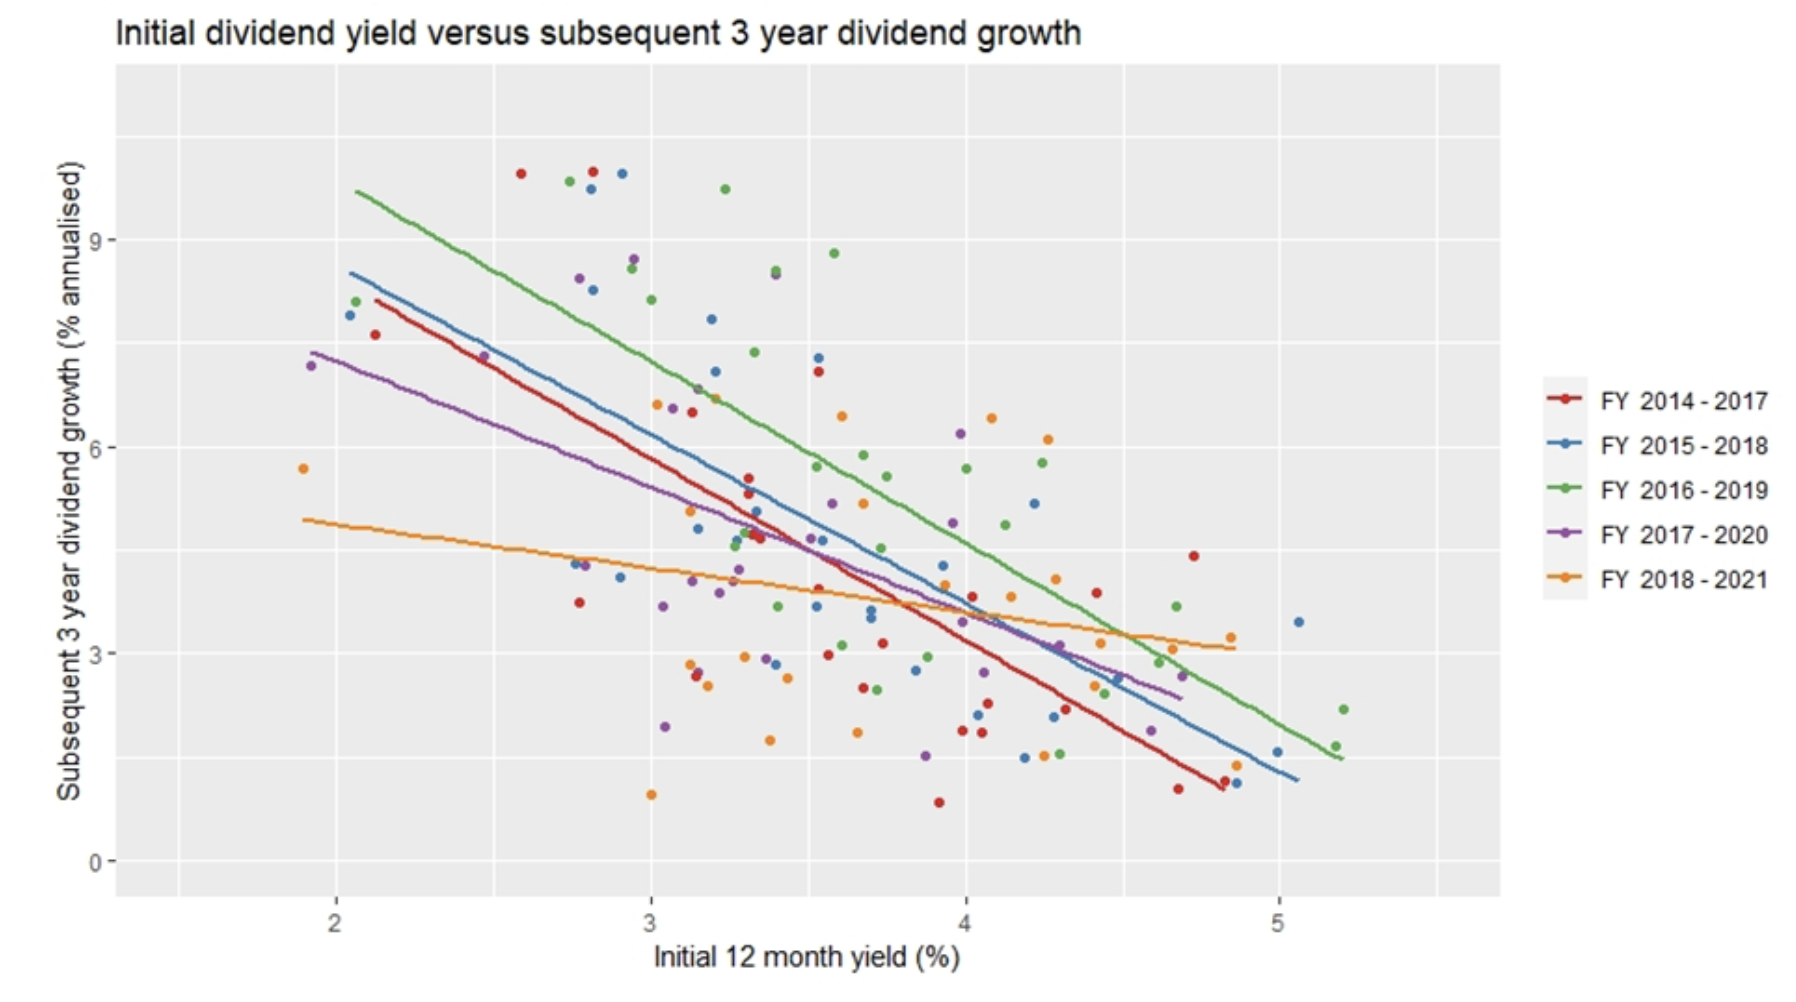 DIVIDEND GROWTH VERSUS STARTING YIELD OF UK AND GLOBAL EQUITY INCOME SECTORS